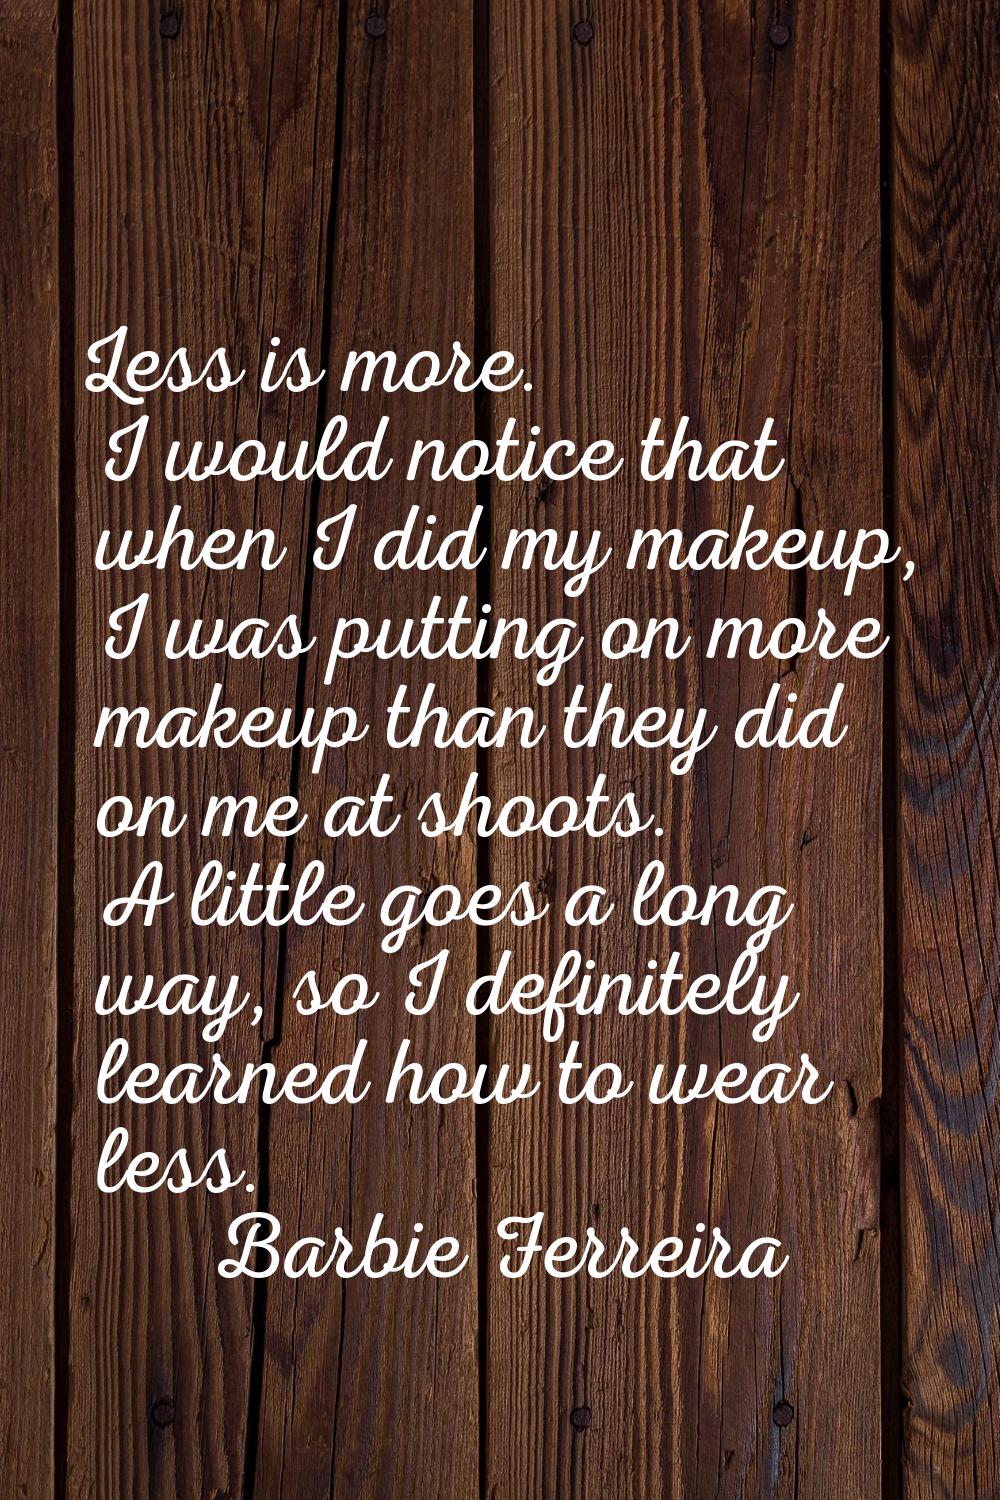 Less is more. I would notice that when I did my makeup, I was putting on more makeup than they did 